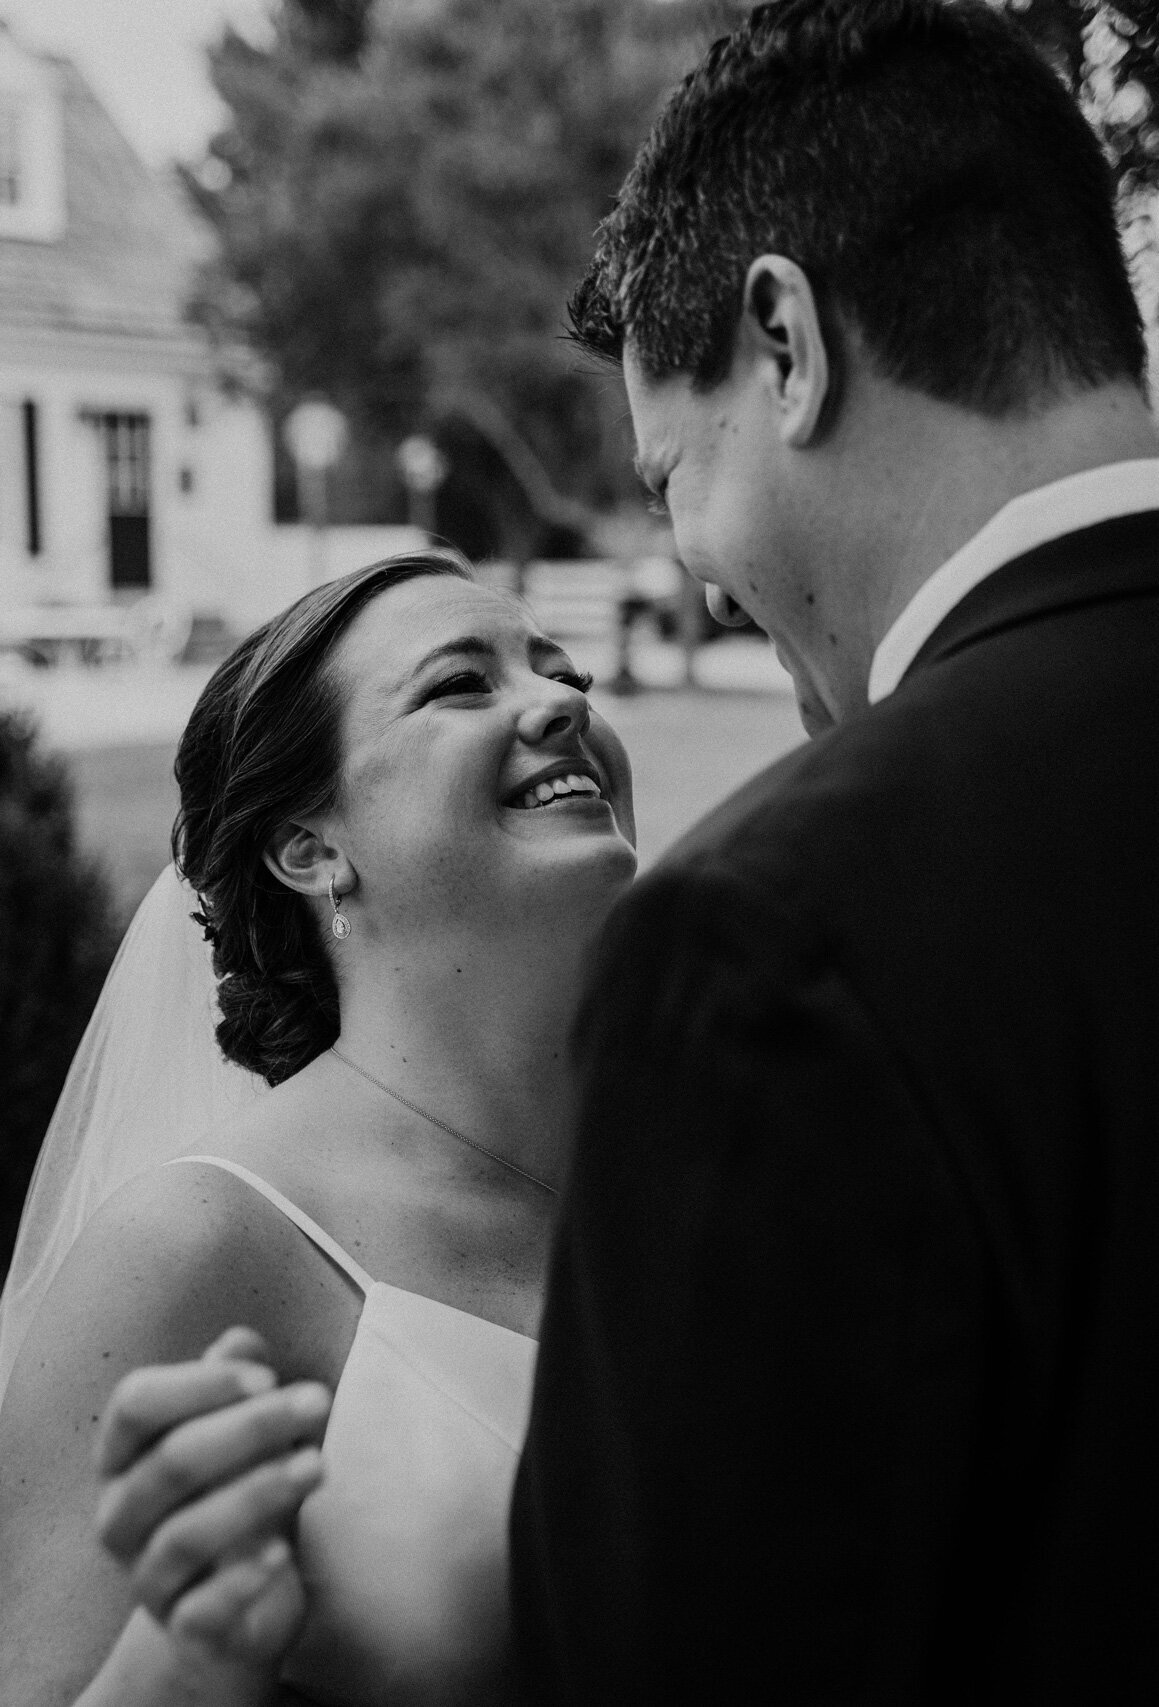 Virginia Wedding Photos of a young couple smiling at each other in a dreamy black and white edit